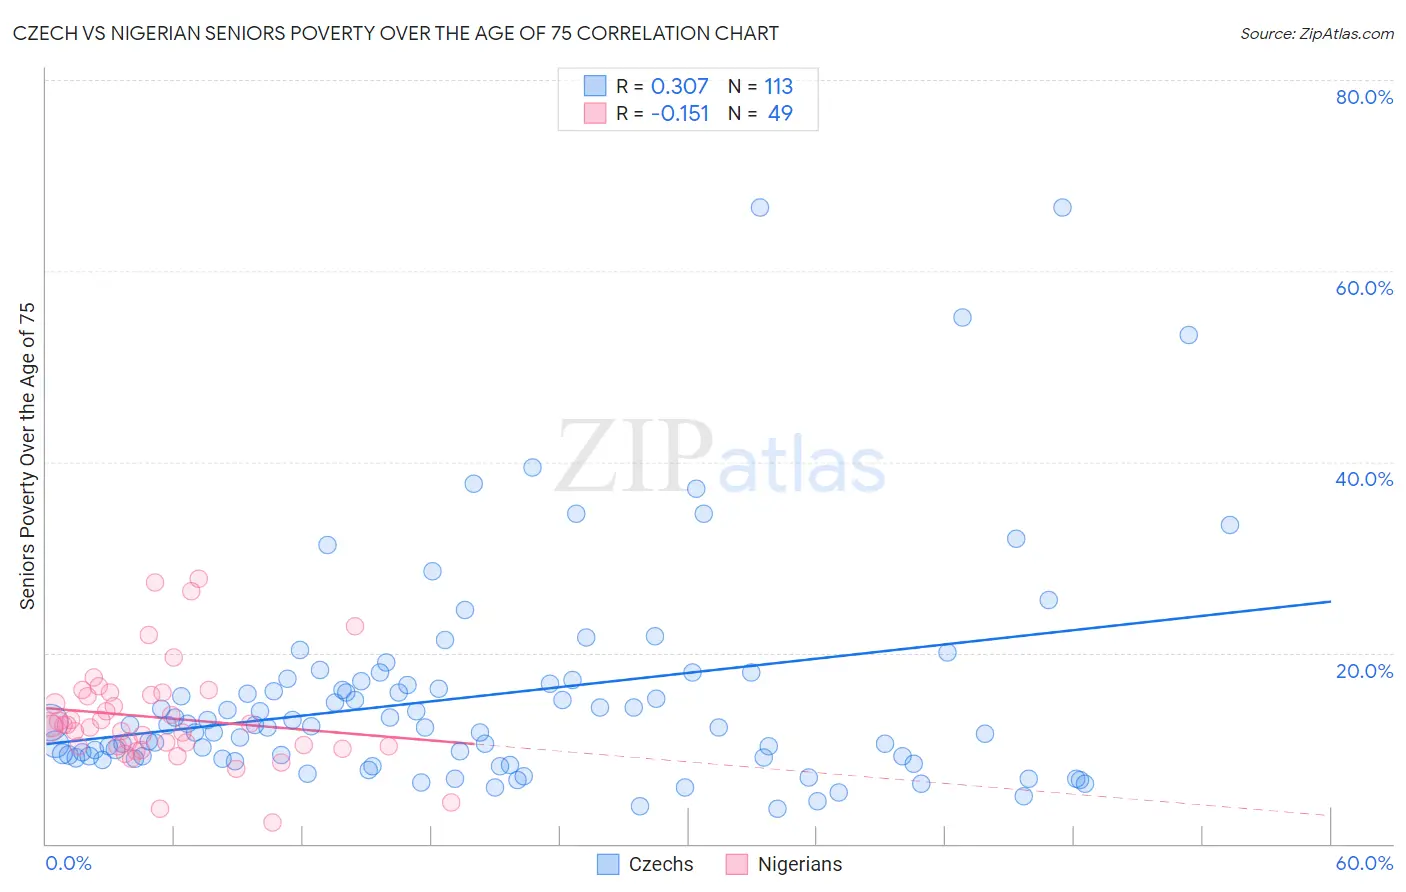 Czech vs Nigerian Seniors Poverty Over the Age of 75